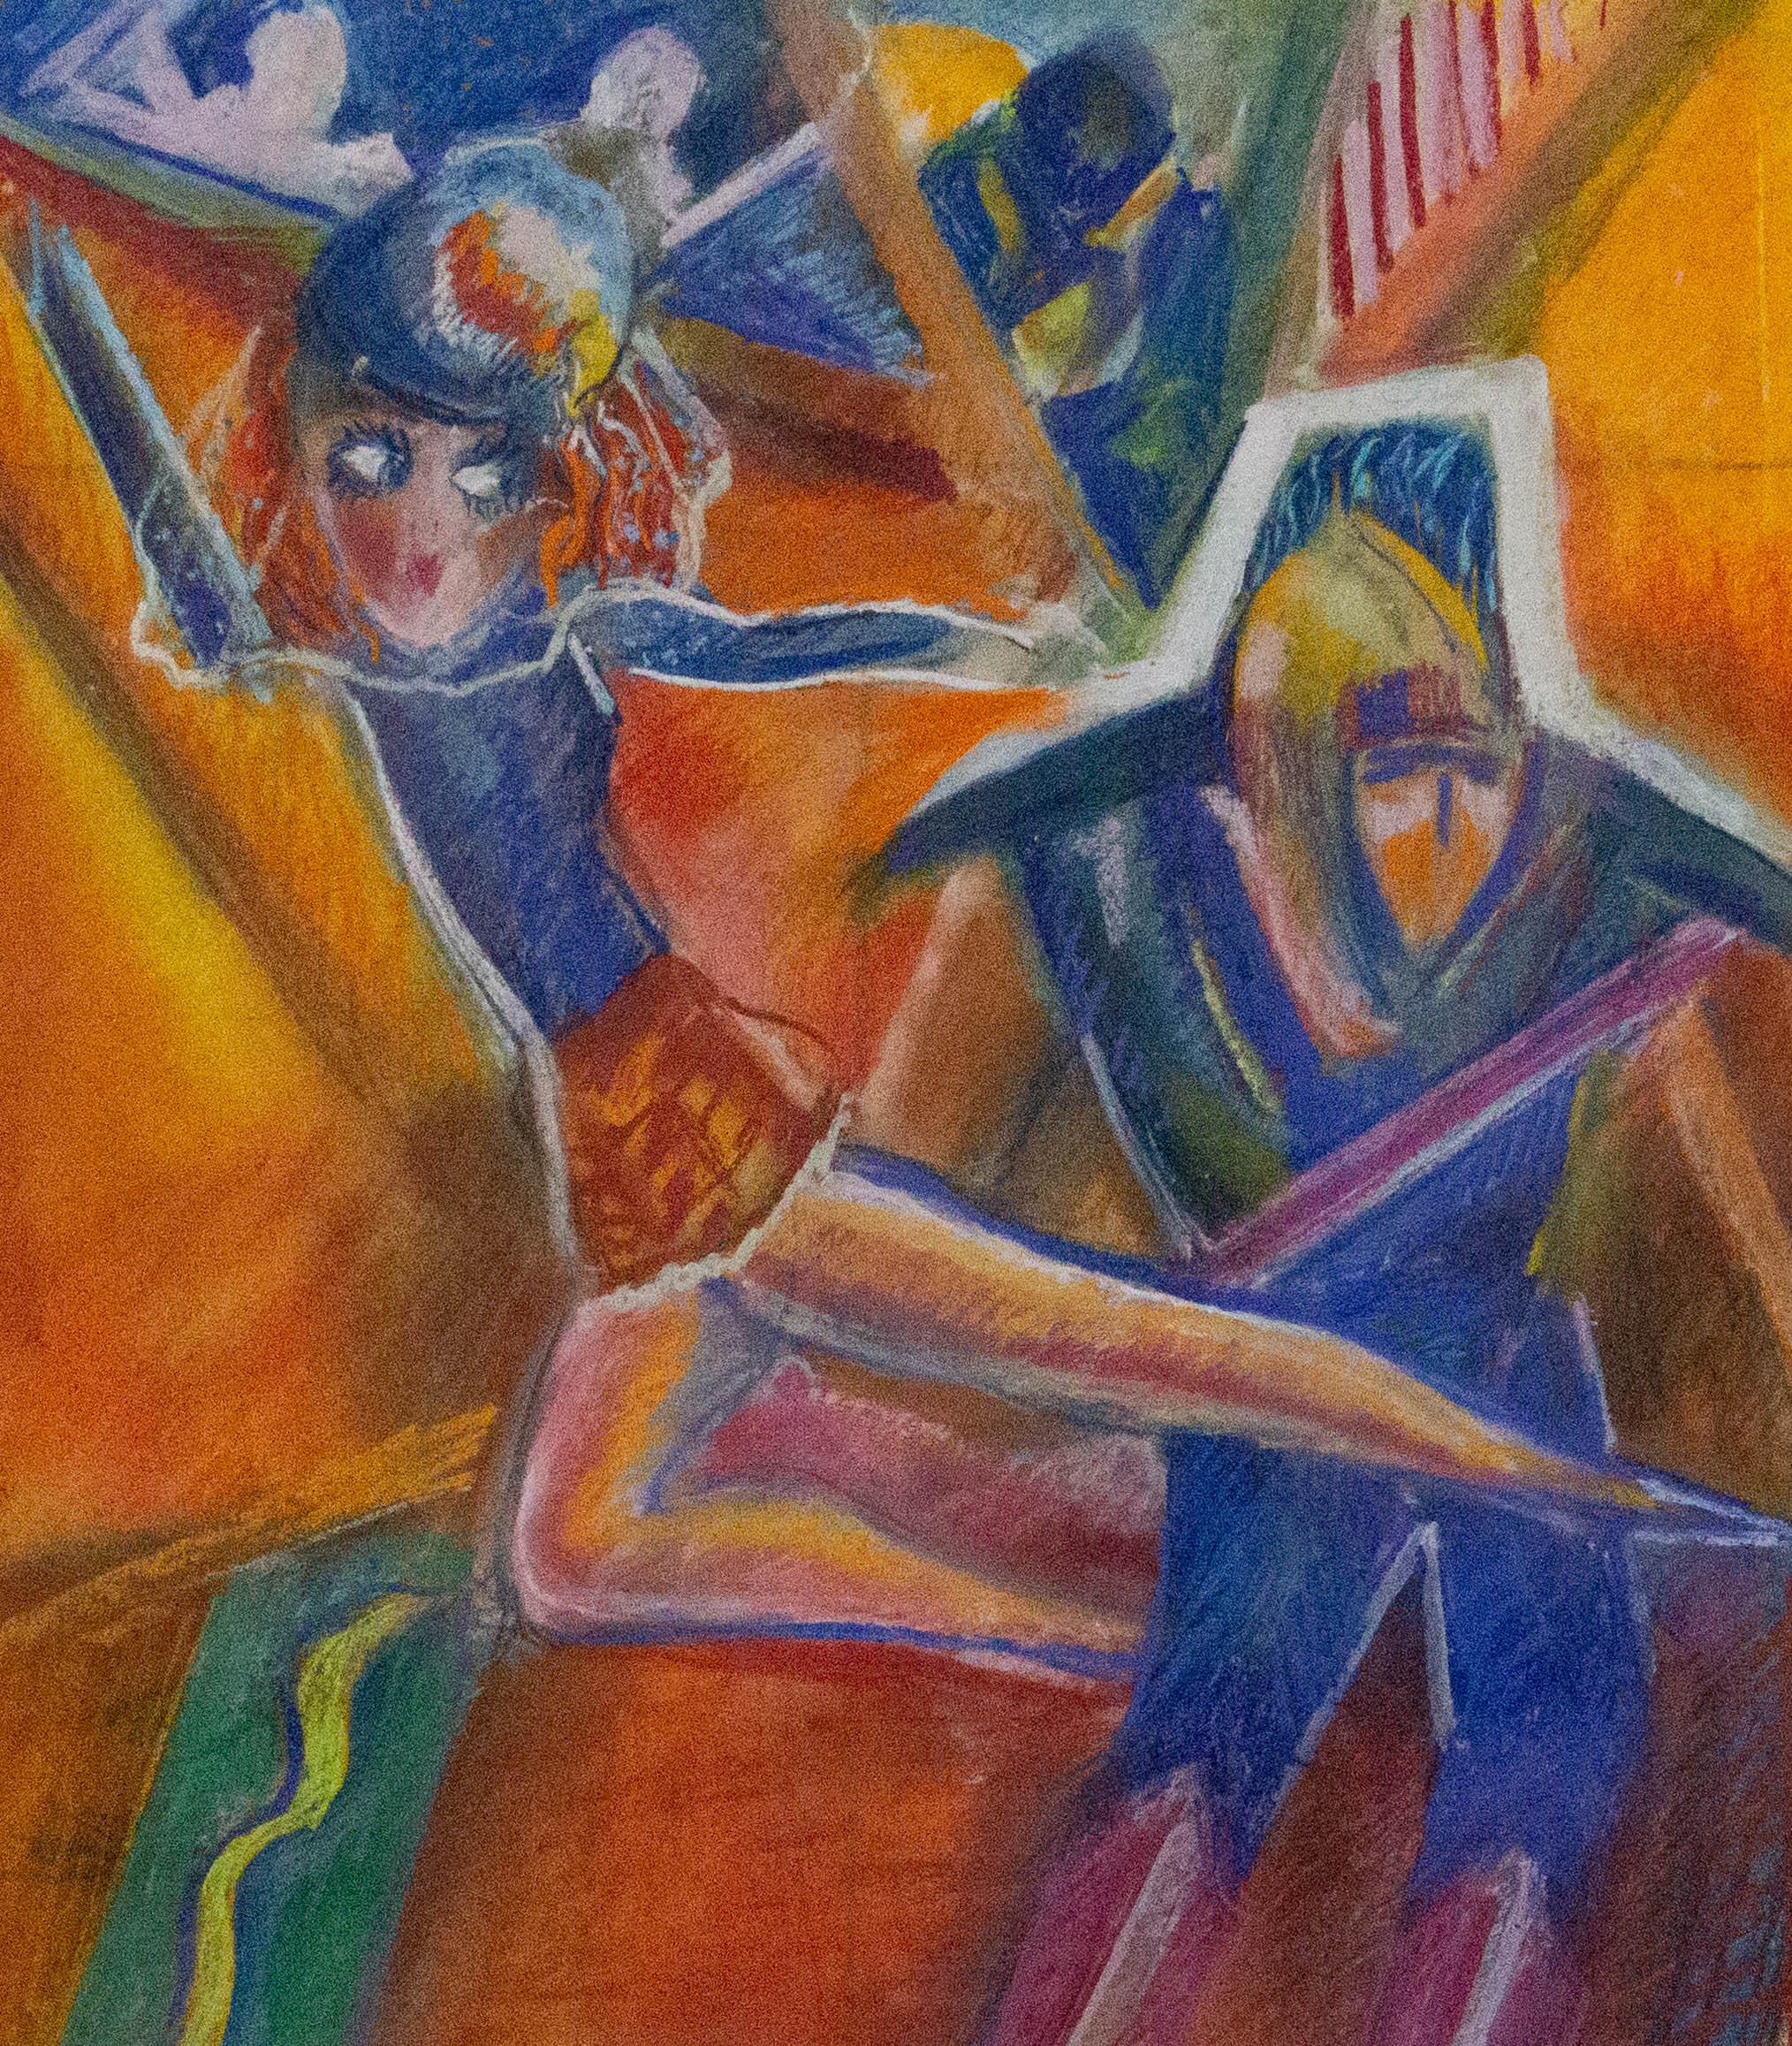 A vibrant and dynamic pastel scene showing a woman and a strange blue figure performing a circus routine, watched by faceless onlookers in the stands behind them. The artist's use of colour and movement makes this piece eye catching and bold. The